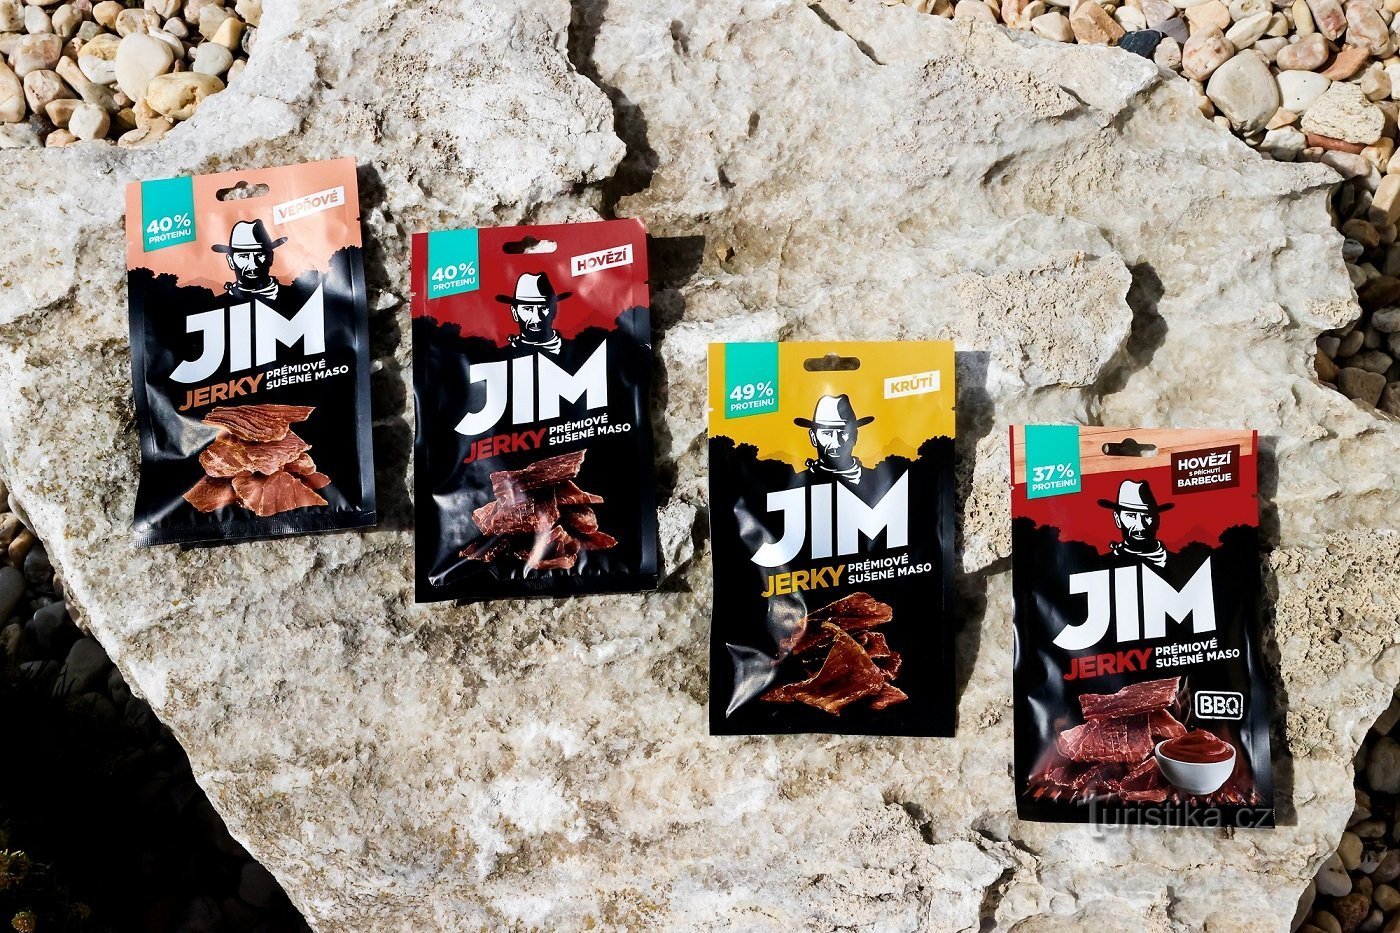 Jim Jerky: The perfect on-the-go snack